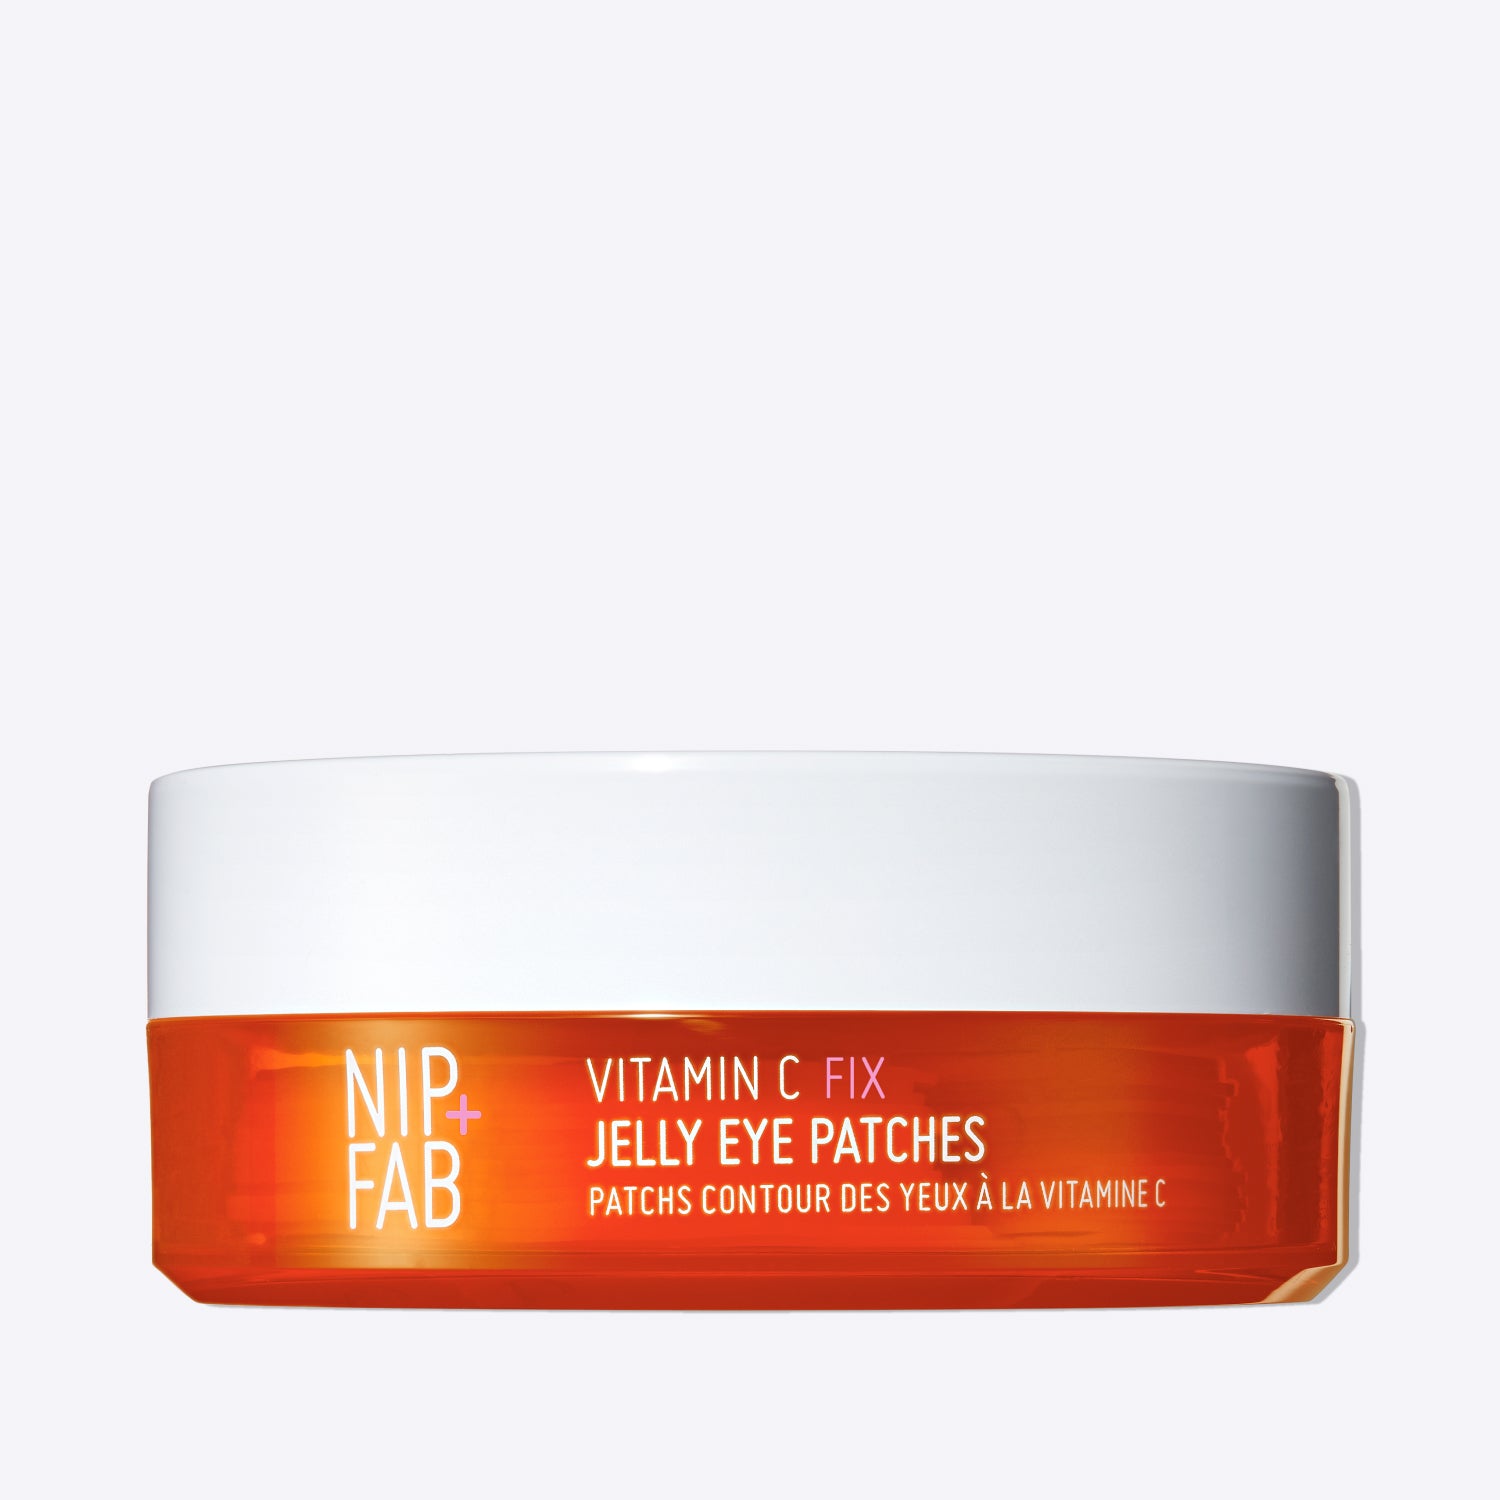 Vitamin C Fix Jelly Eye Patches